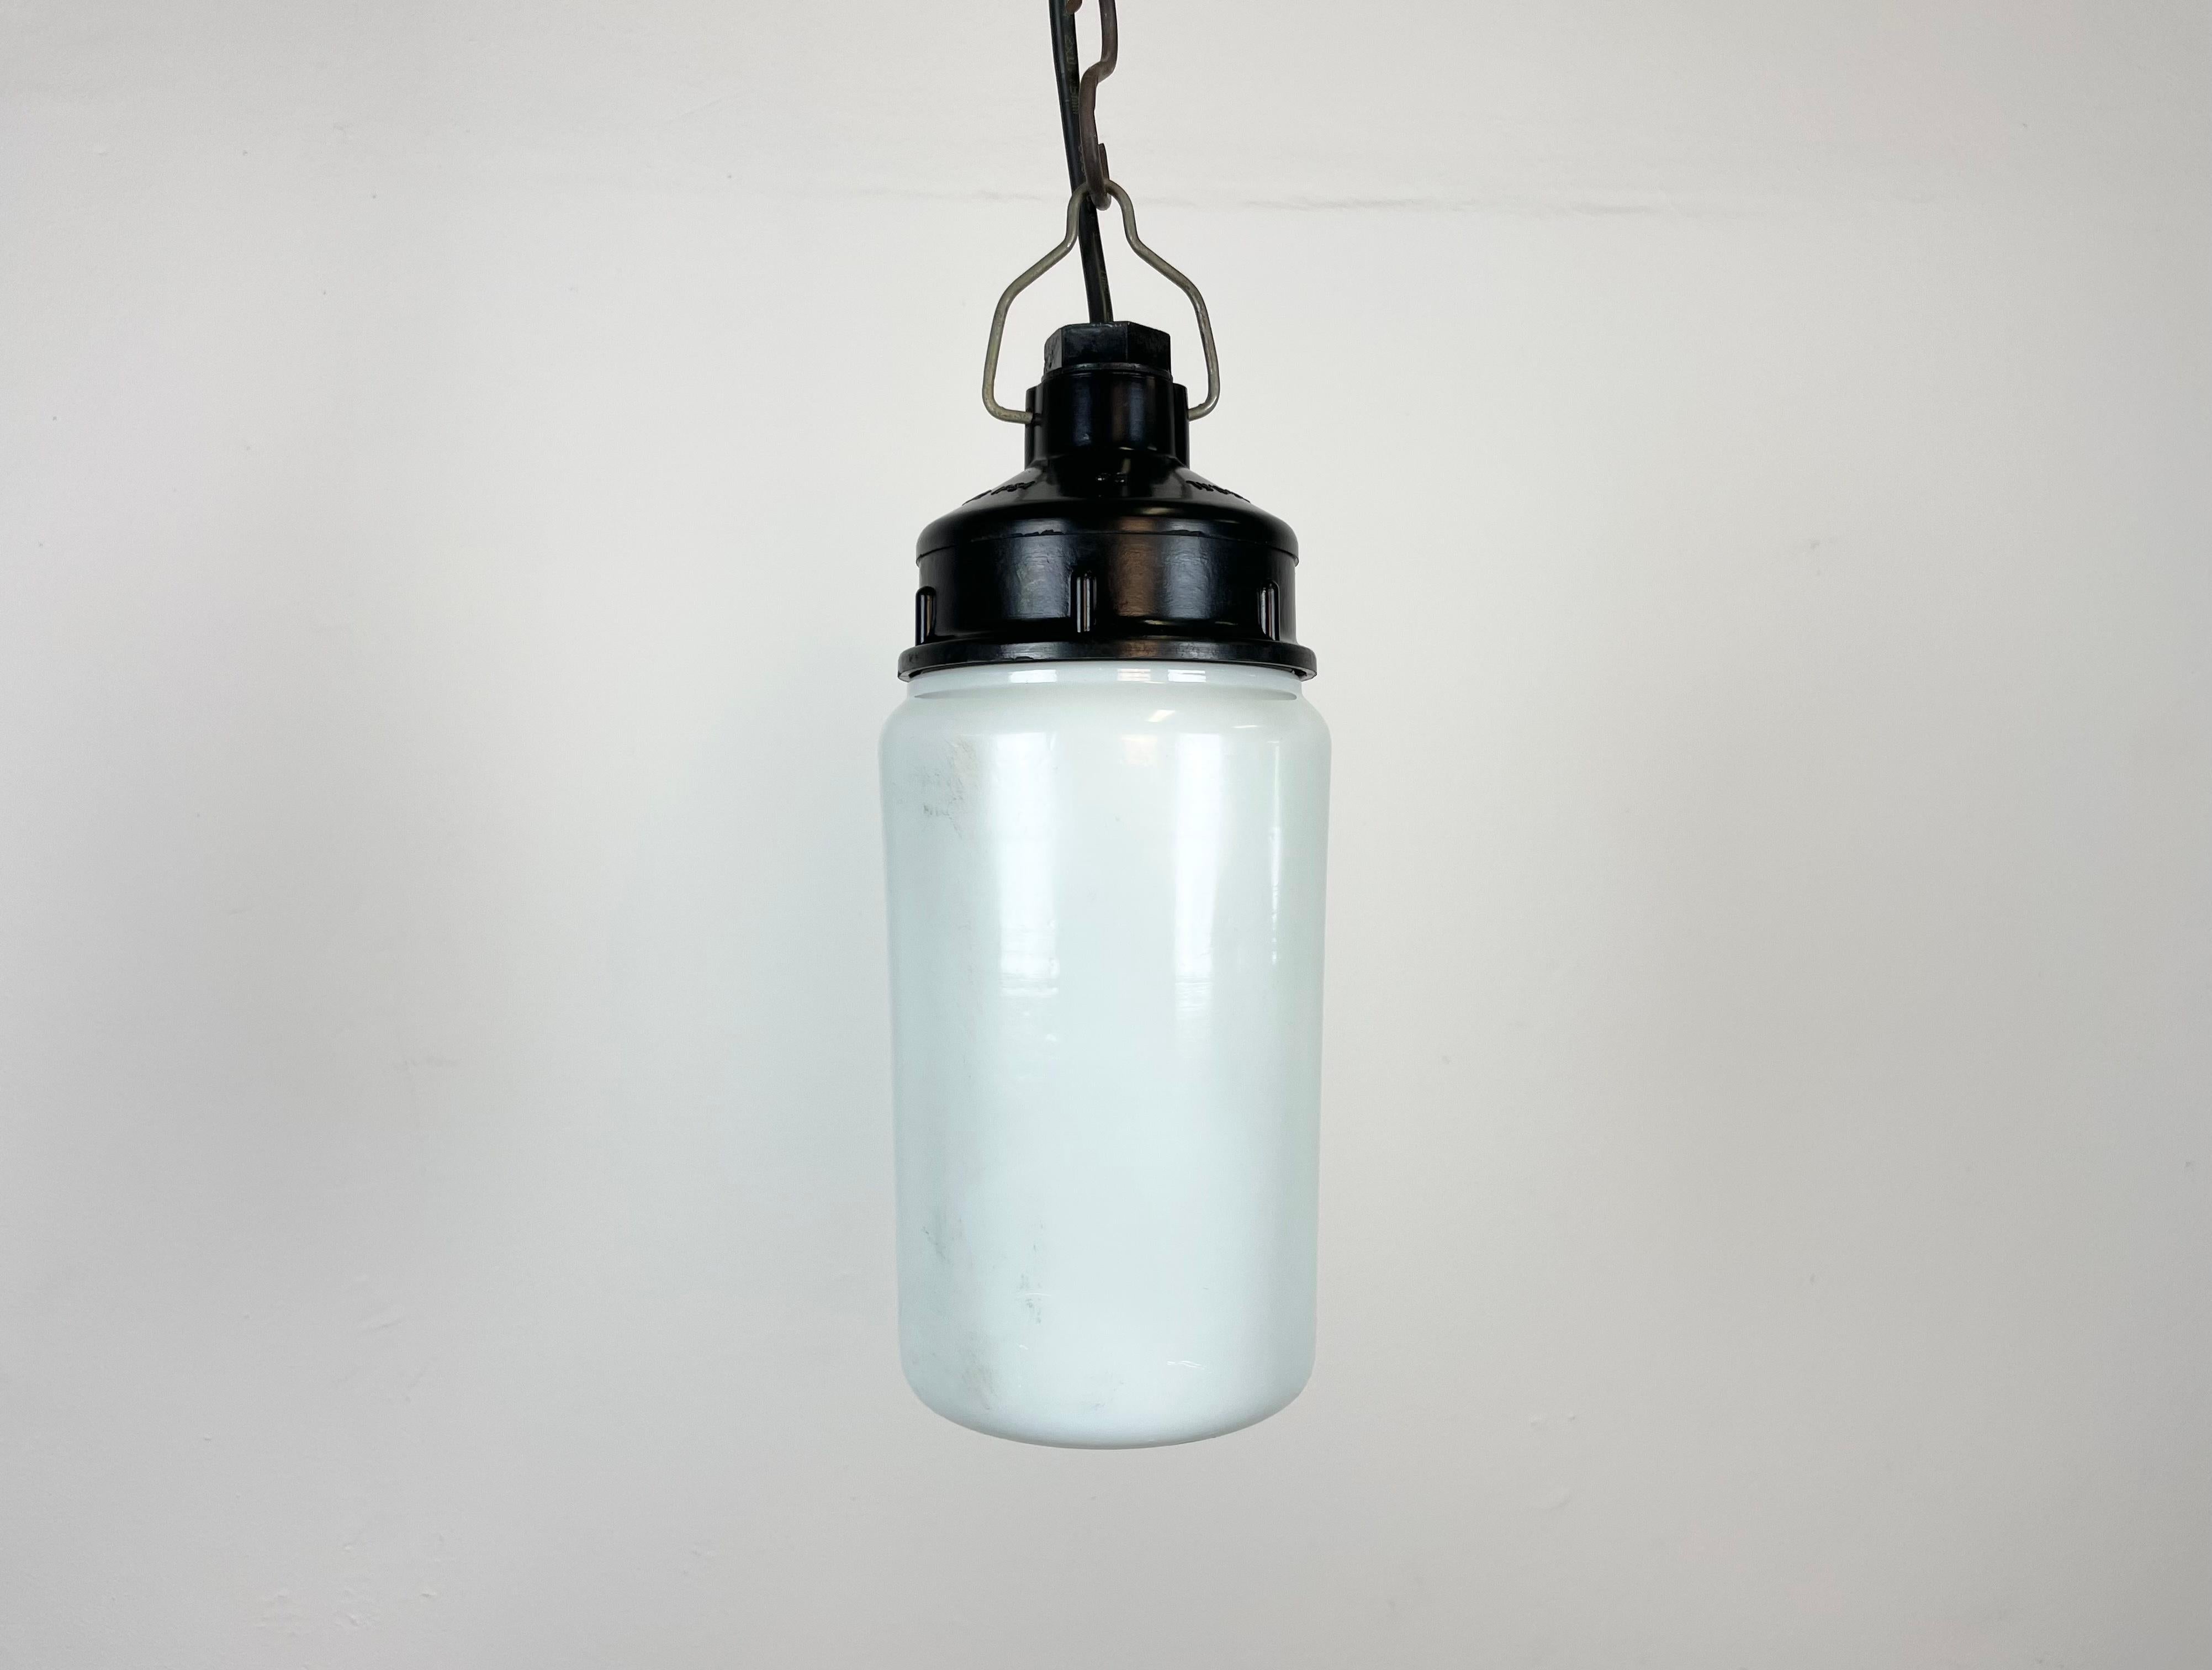 Vintage industrial light made in former Soviet Union during the 1970s. It features a brown bakelite top and a milk glass cover. The socket requires E27/E 26 light bulbs. New wire. The weight of the lamp is 0,85 kg.